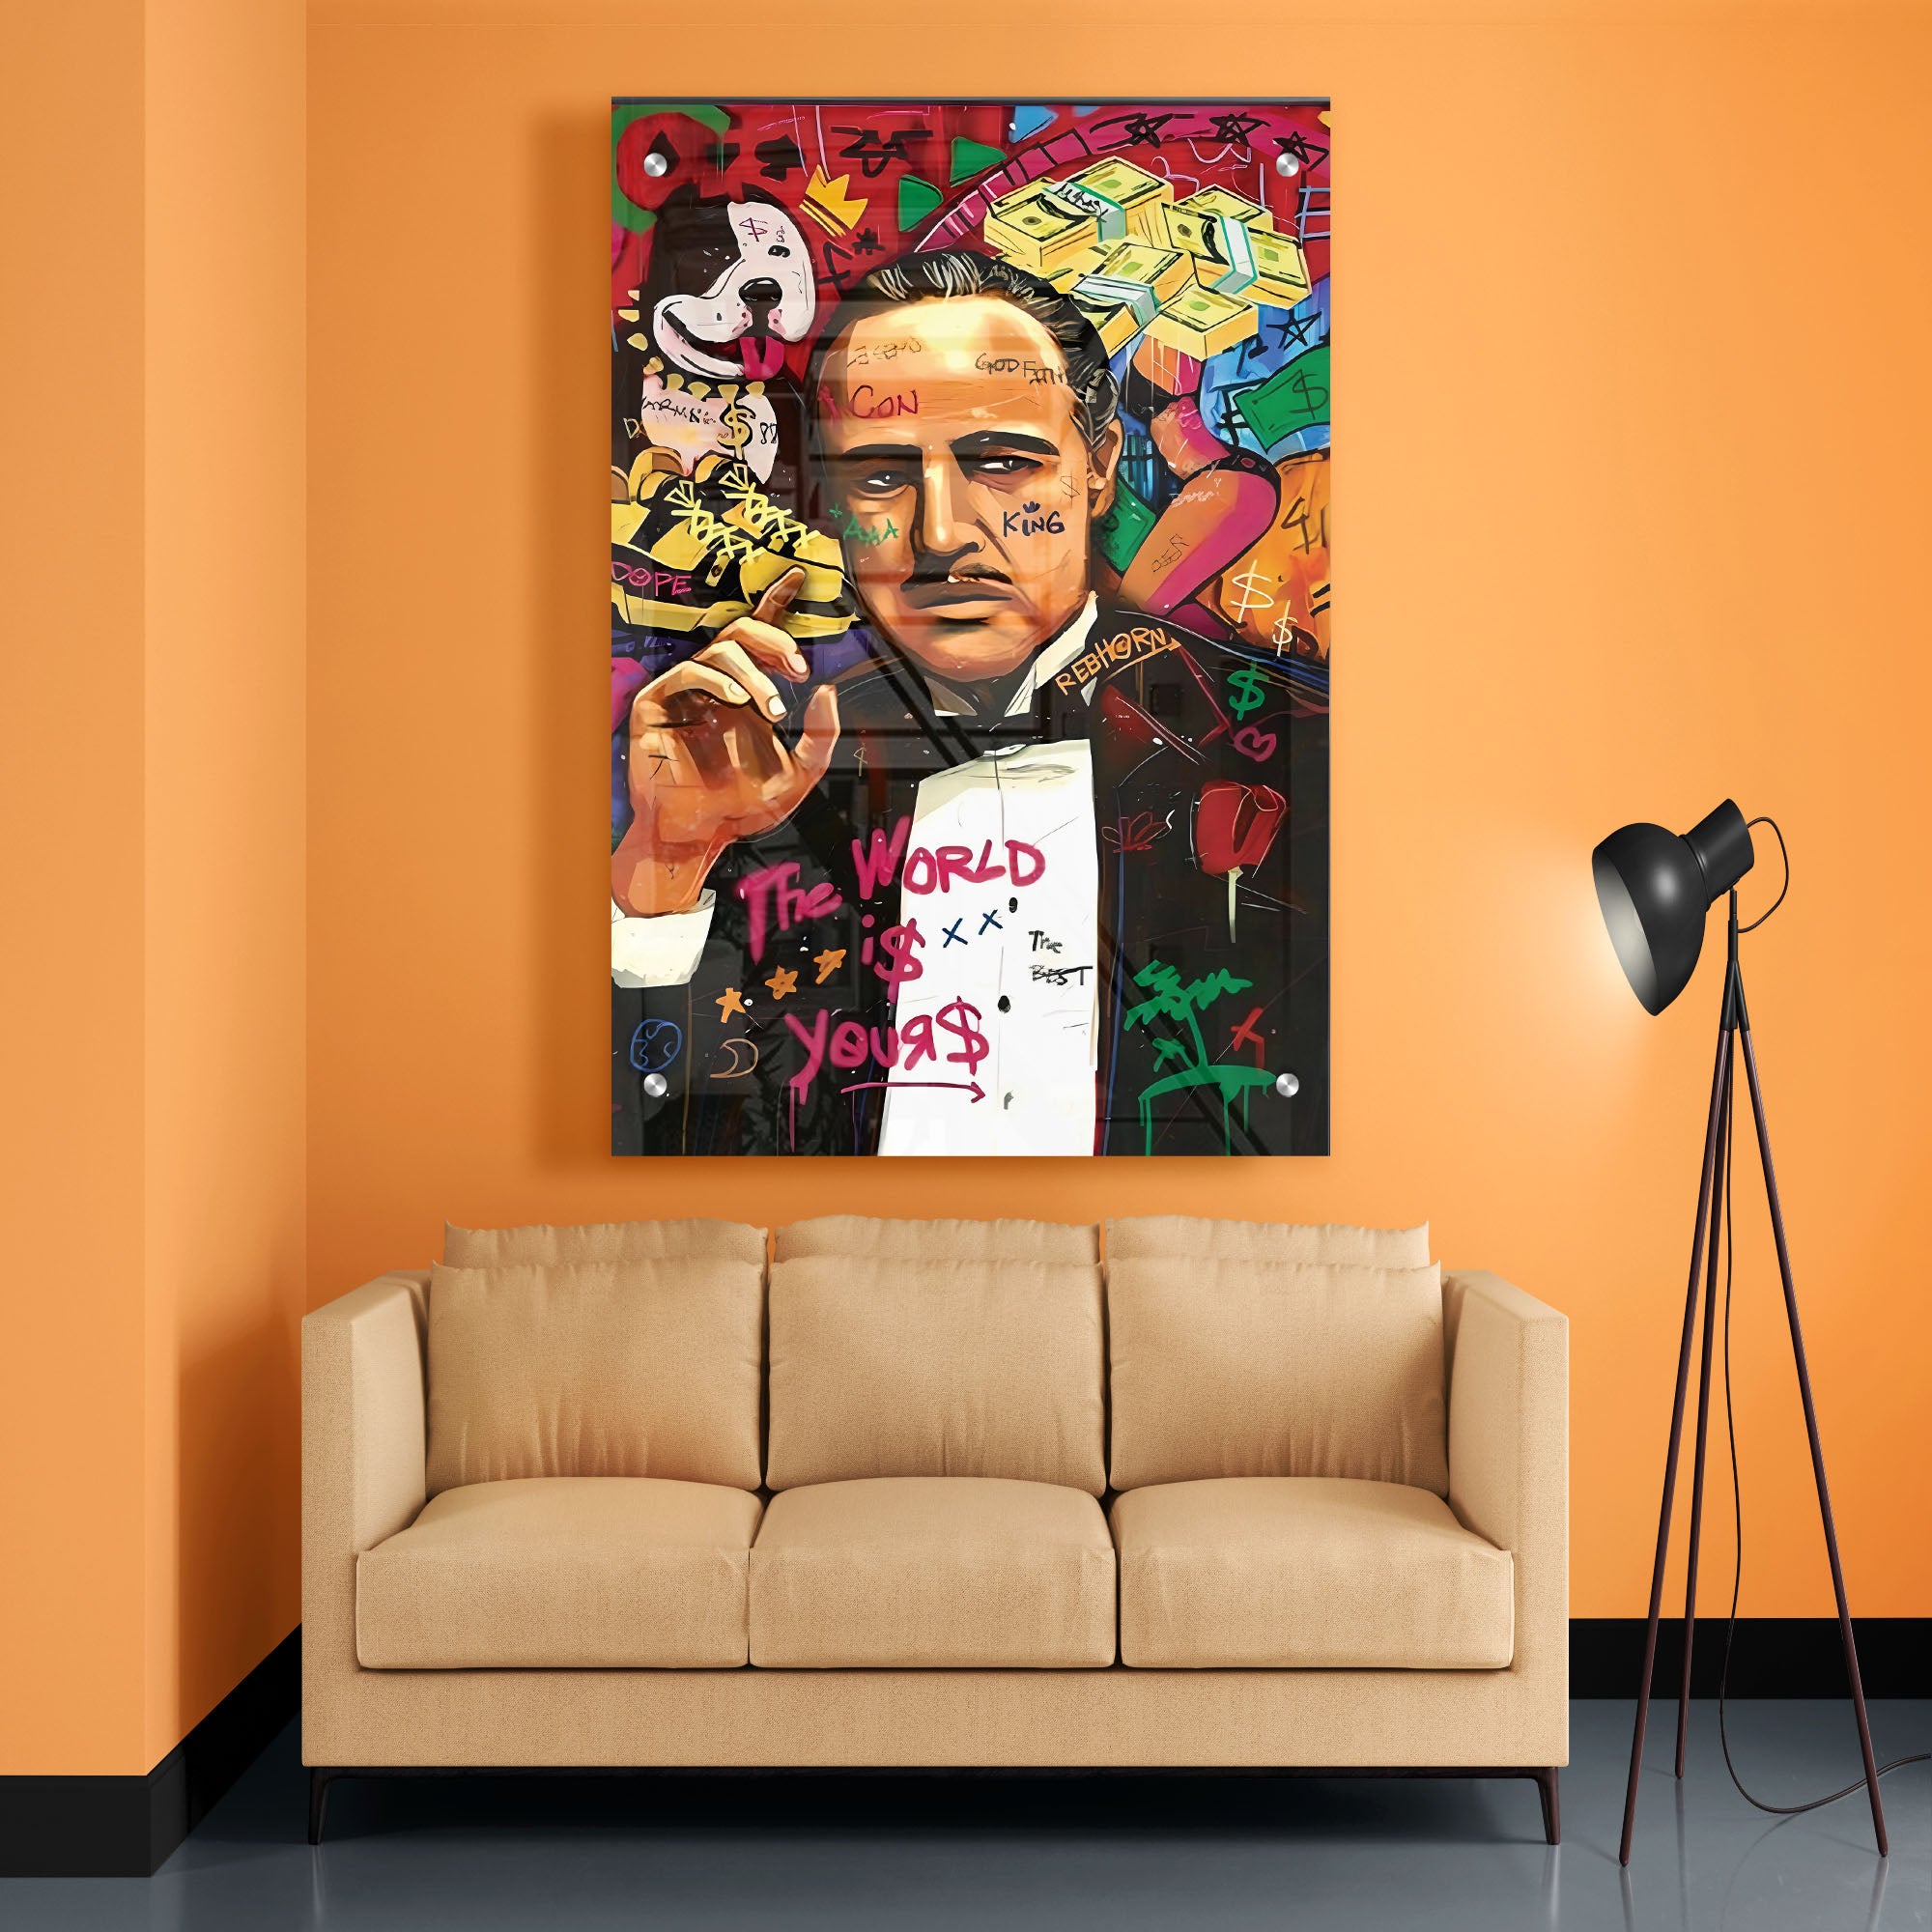 The World is Yours Vito Corleone Acrylic Wall Painting